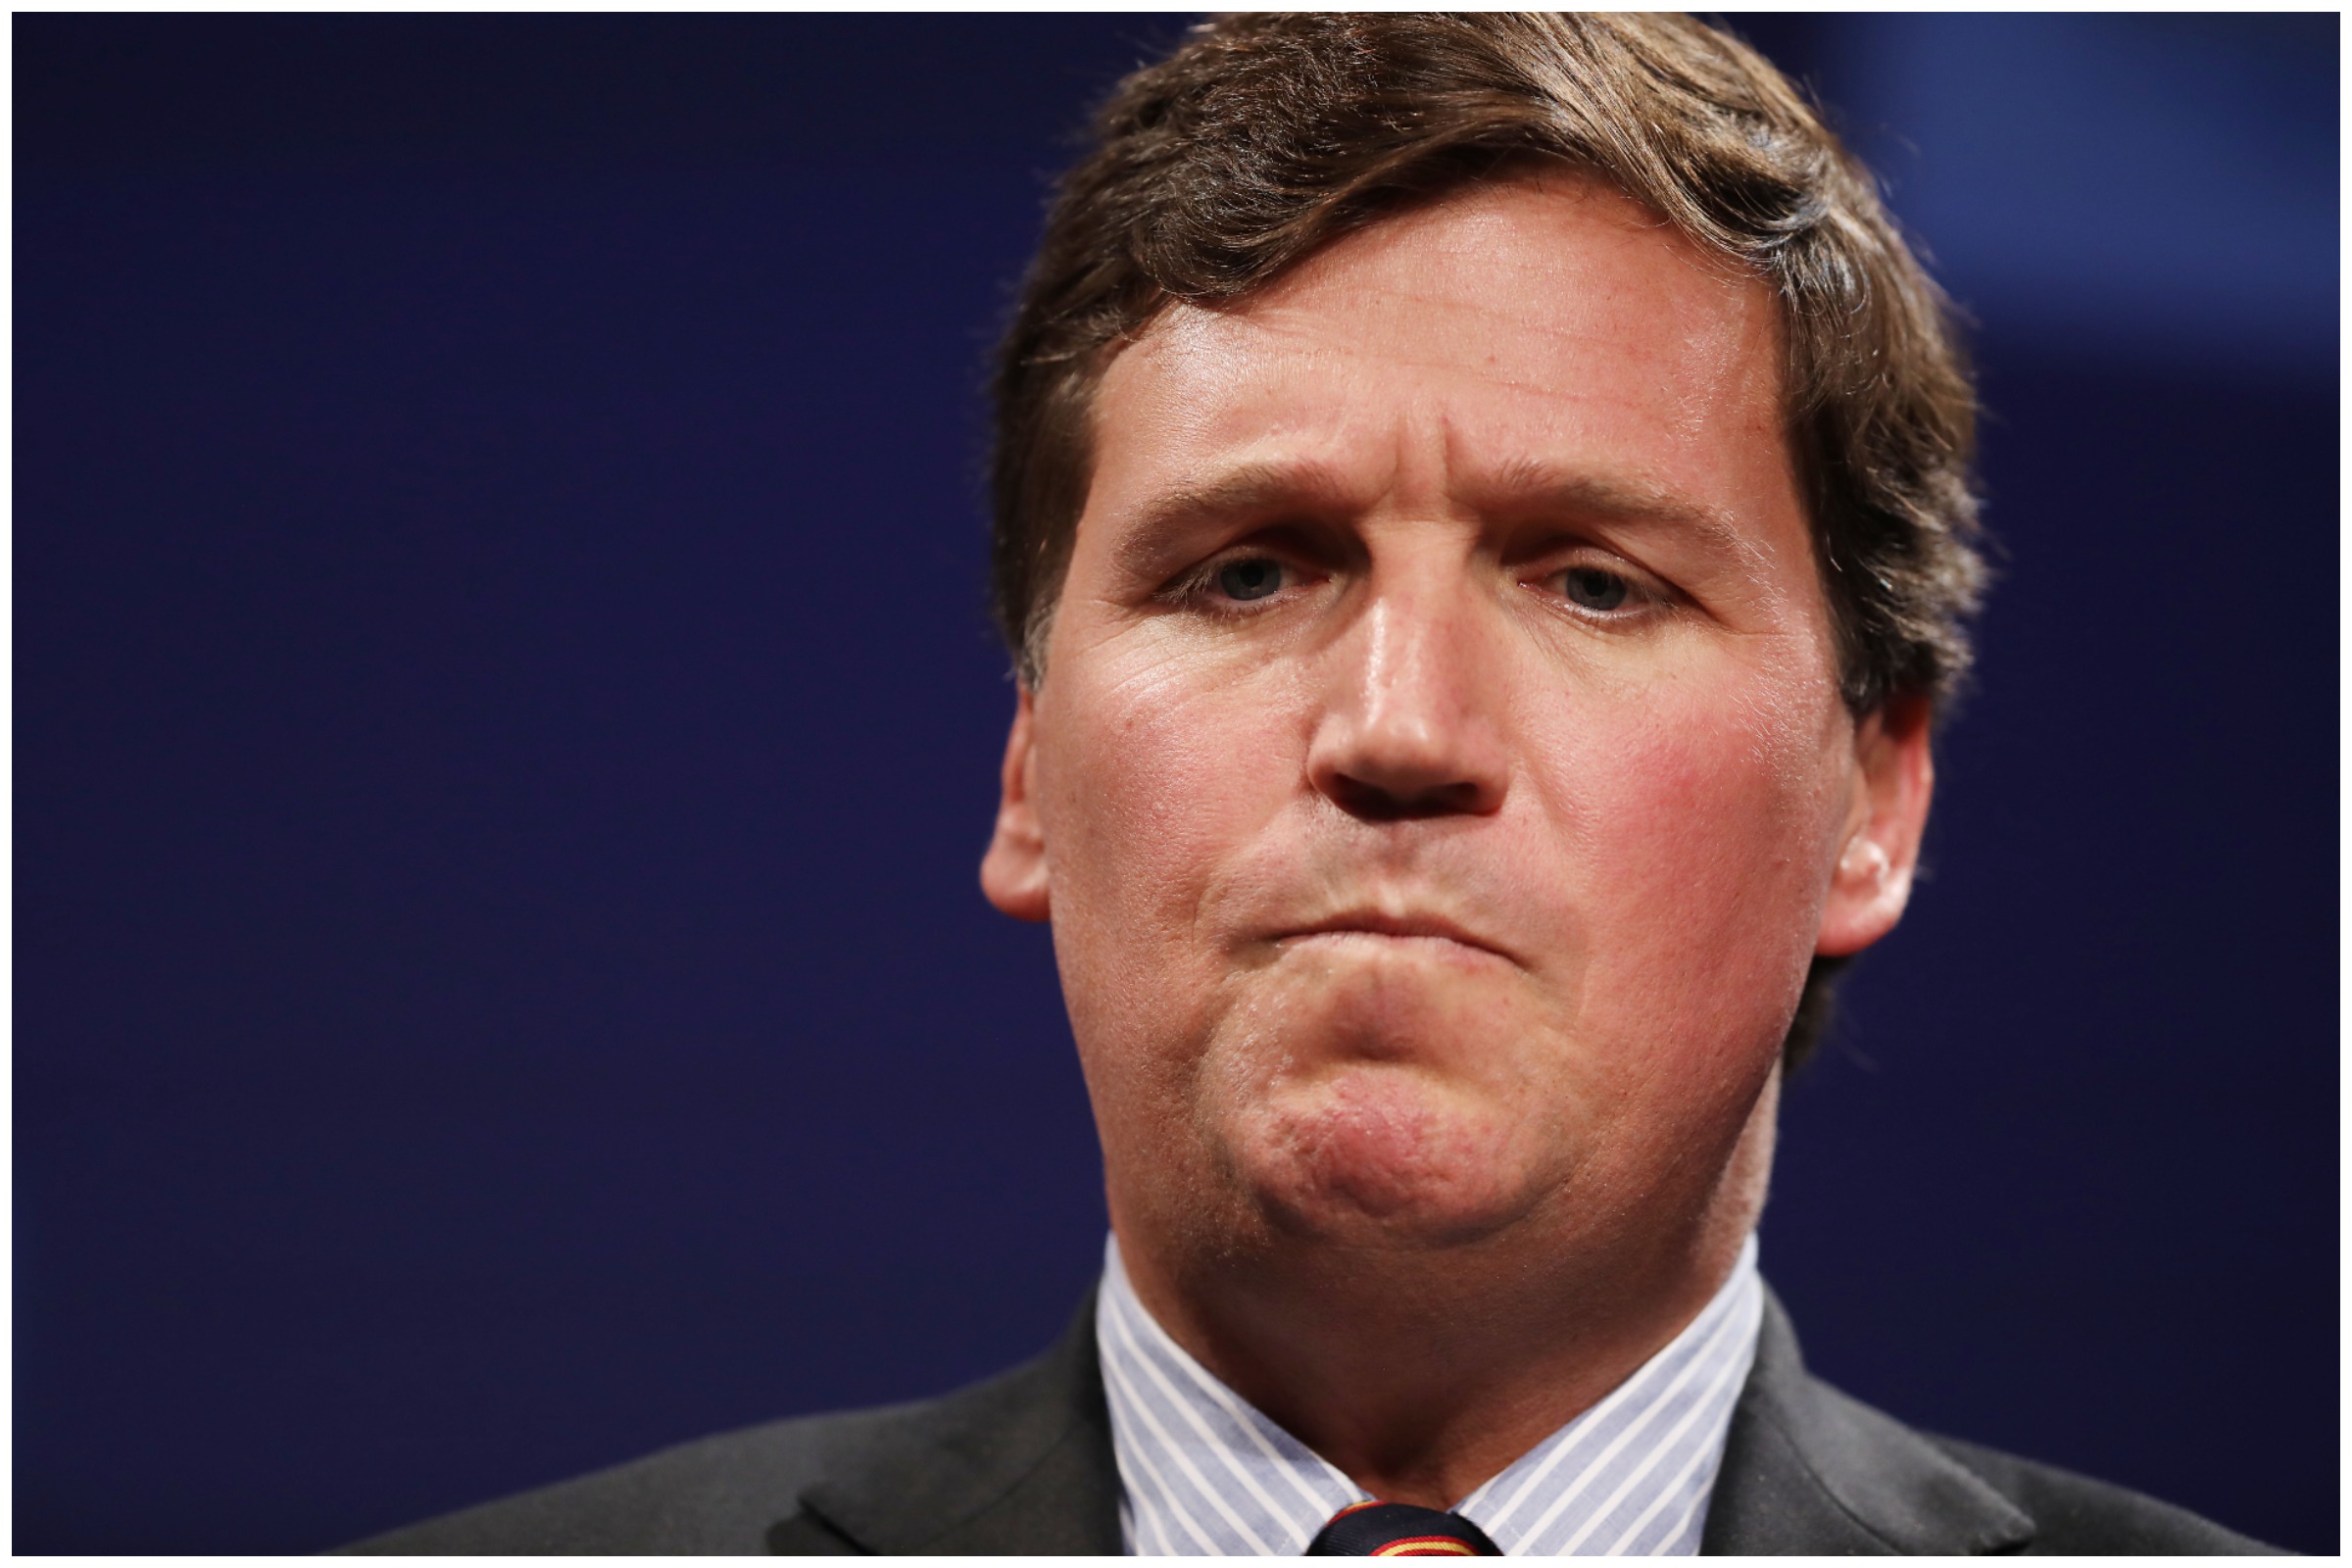 Tucker Carlson’s Testicle Tanning ‘Very Misleading,’ Health Experts Say